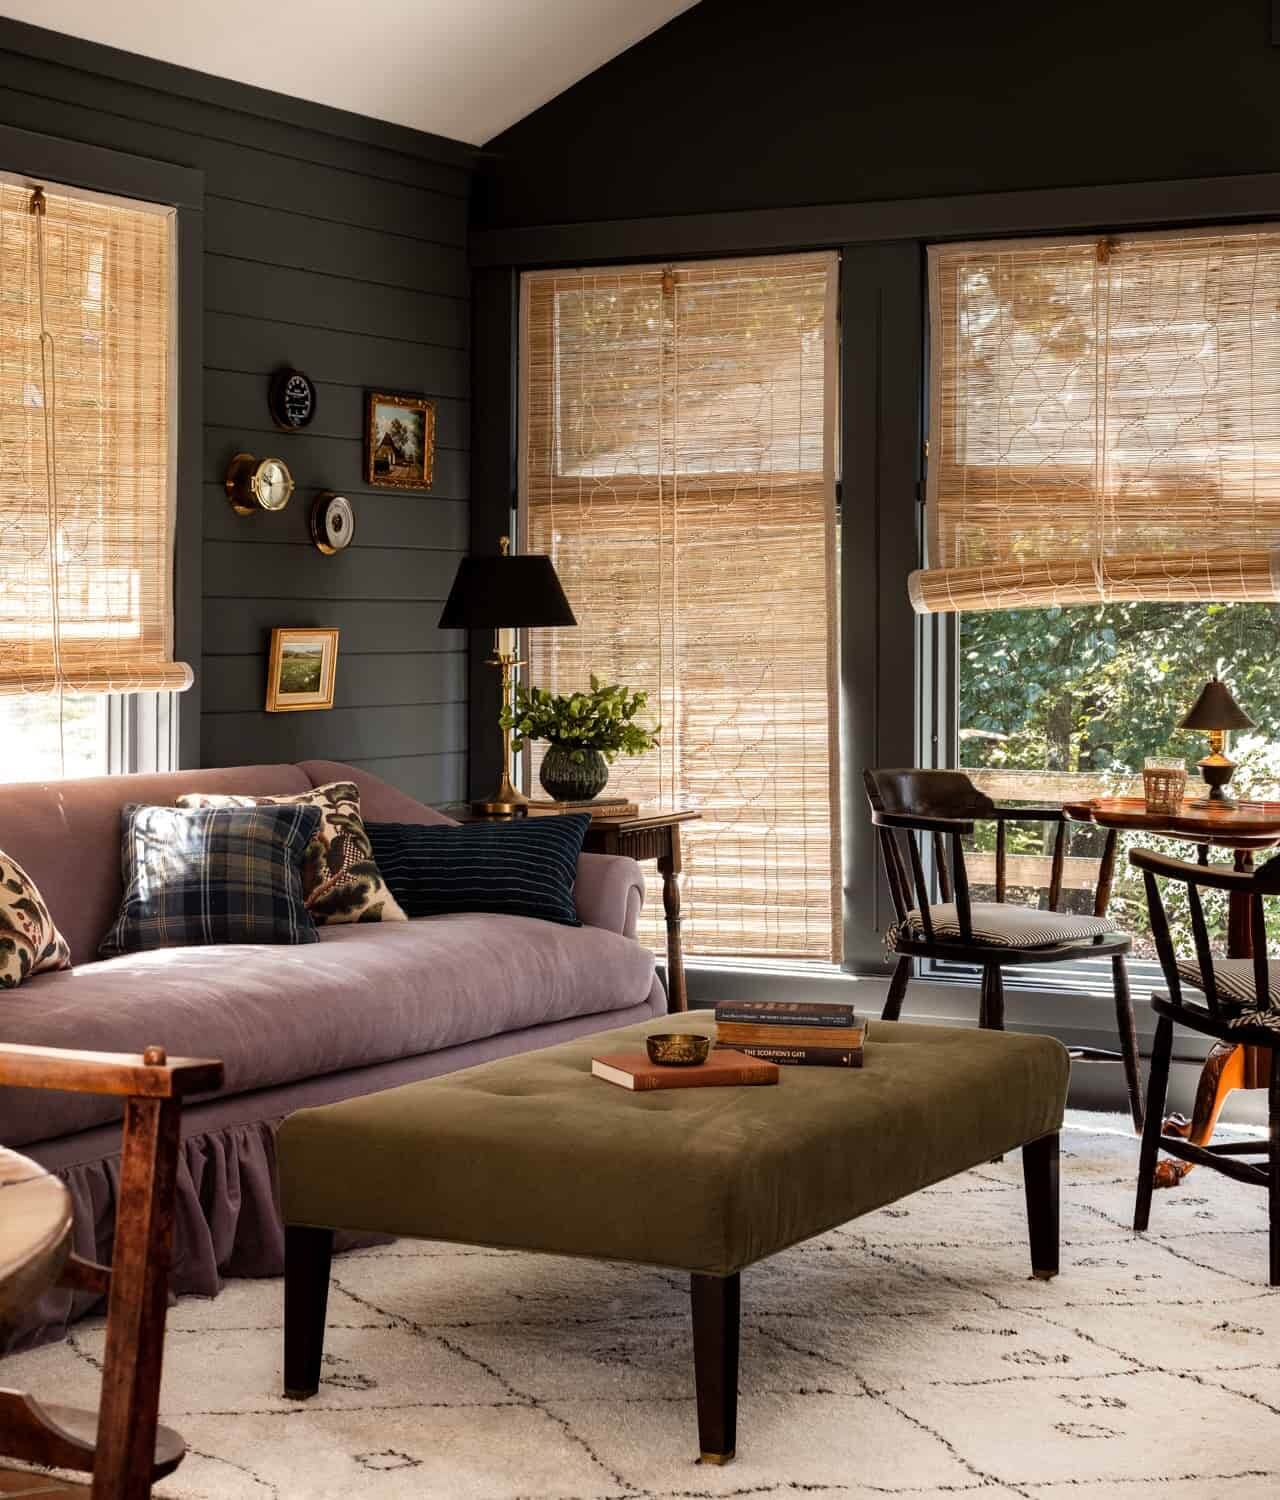 Heidi-Caillier-Design-CT-country-house-Dutchess-County-design-sunroom-dark-paint-indian-chx-blinds-purple-sofa-Nordroom